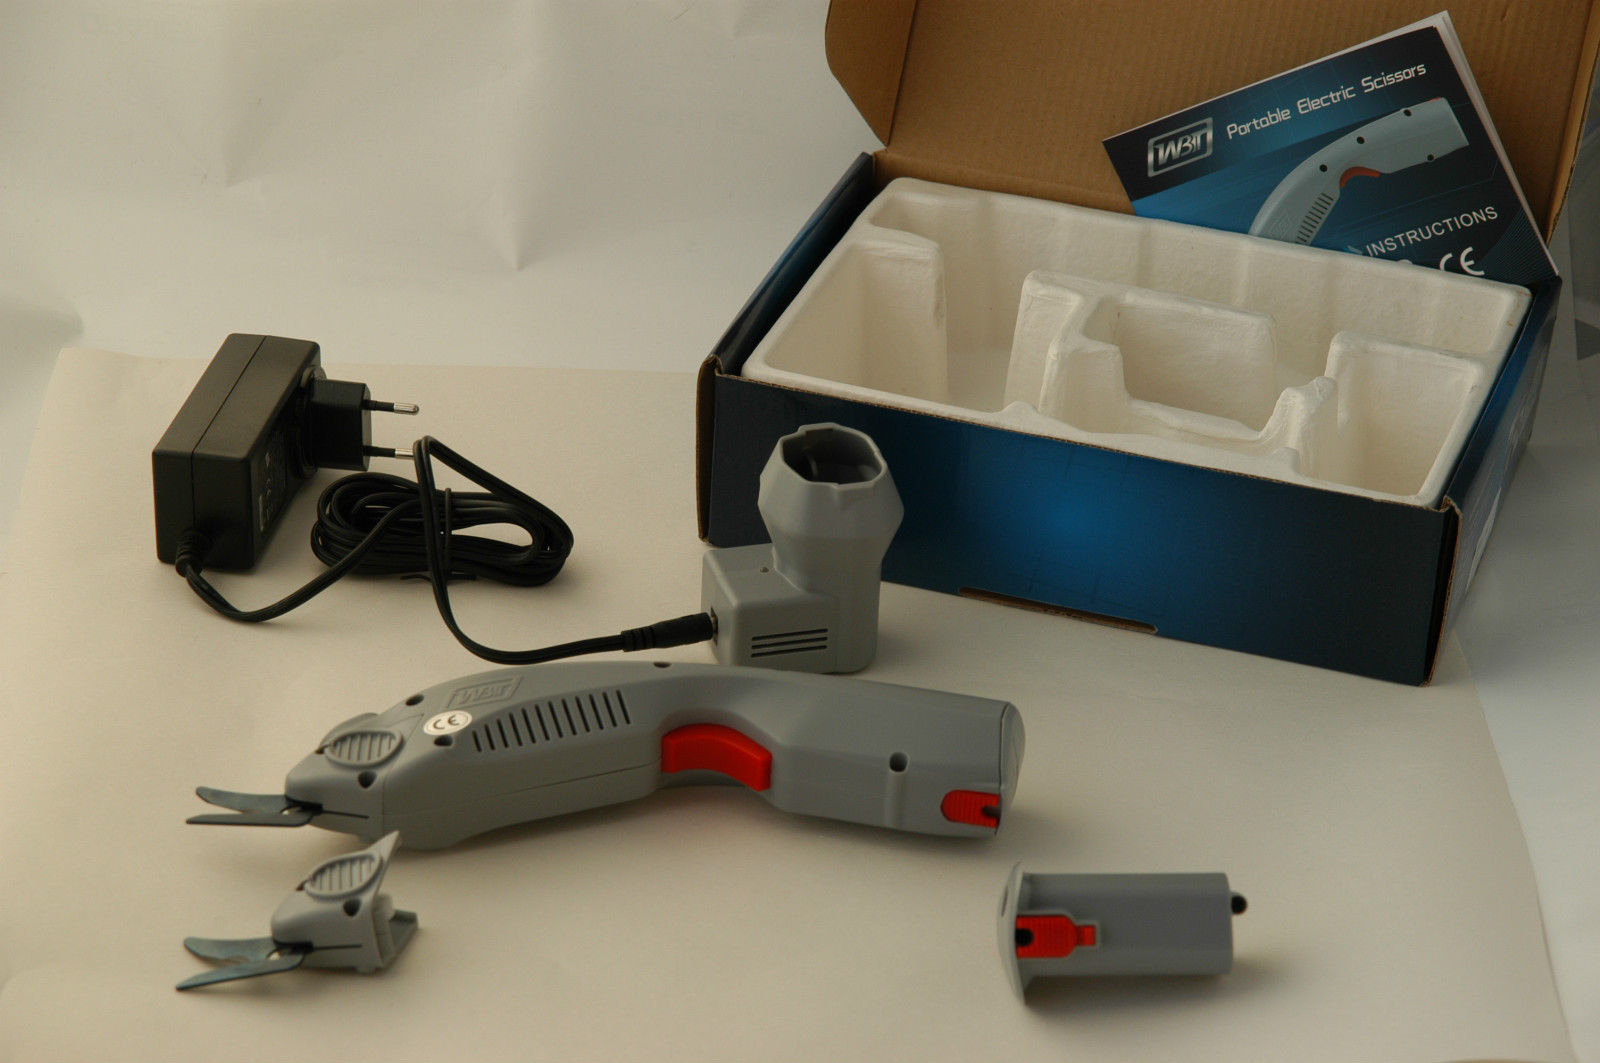 WBT-1 Electric Scissors and Cardboard Boxes 